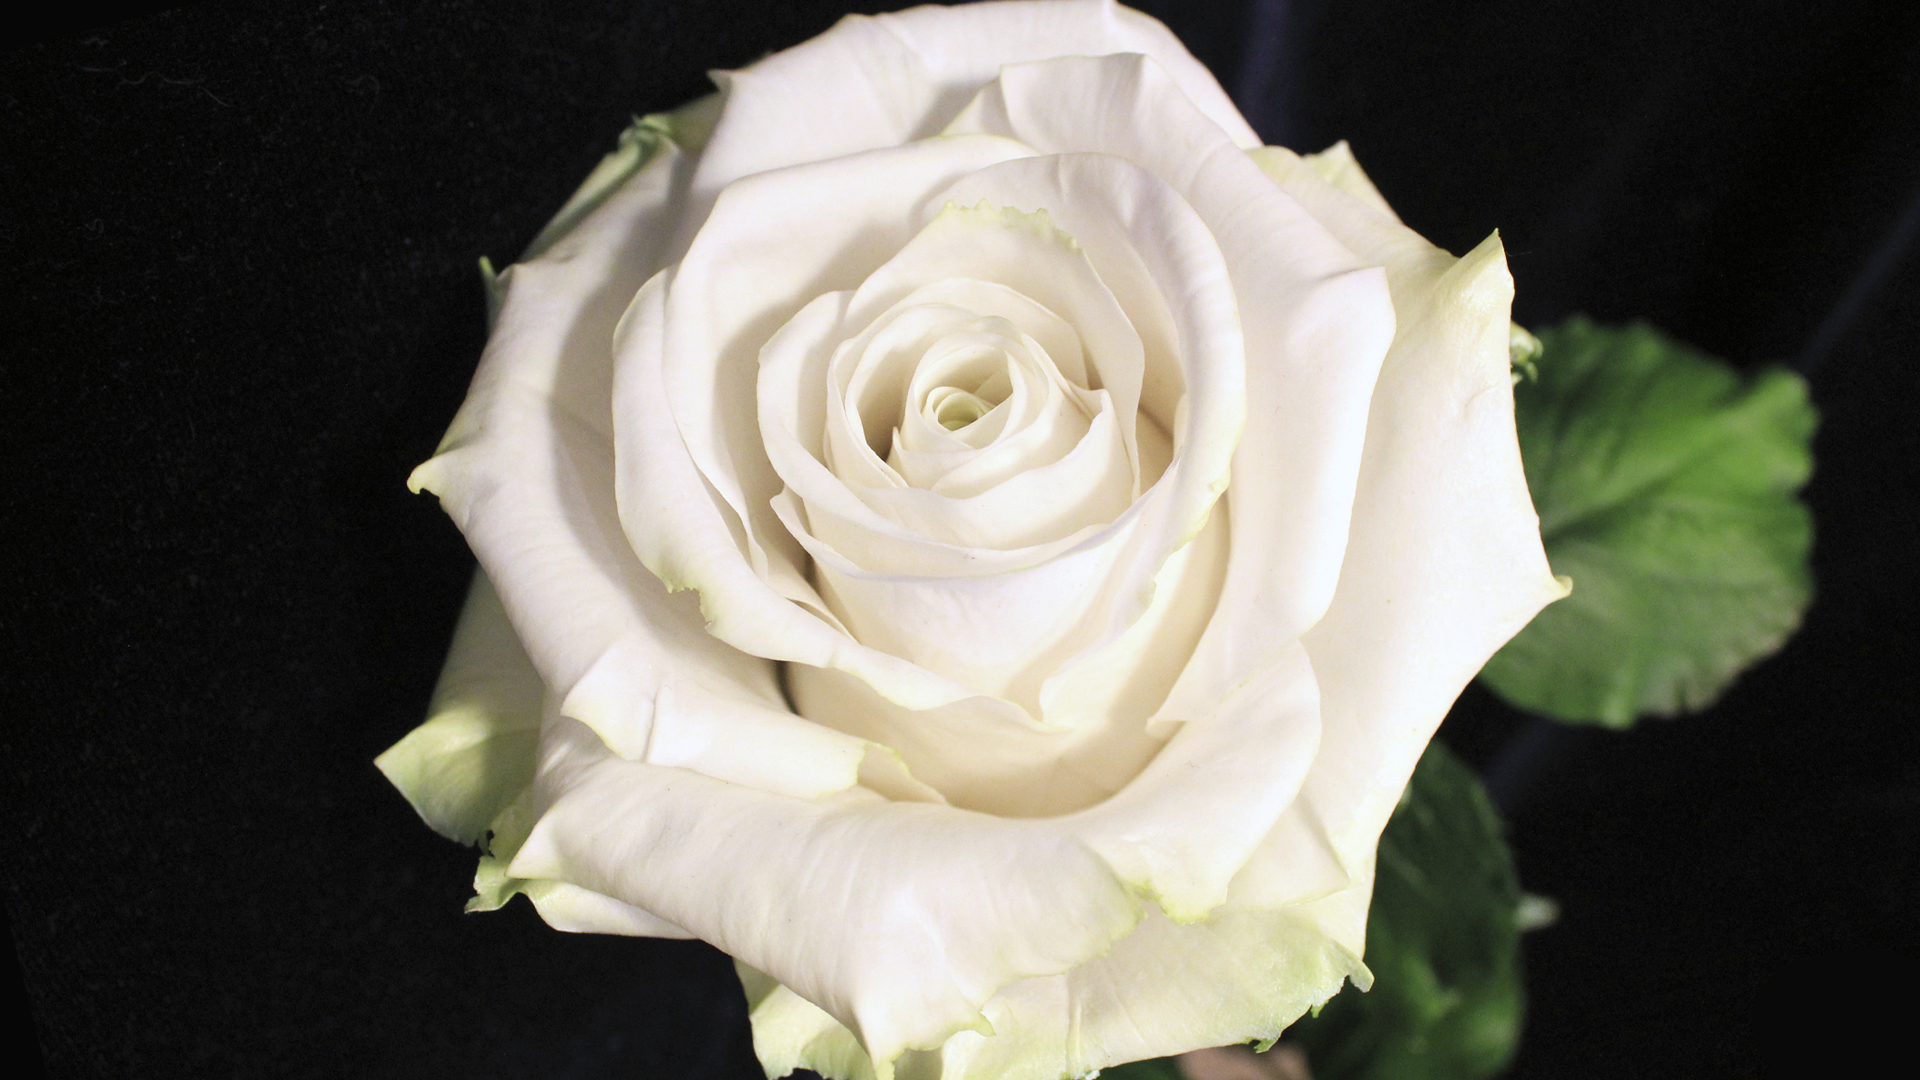 white rose on a black background wallpapers and images   wallpapers